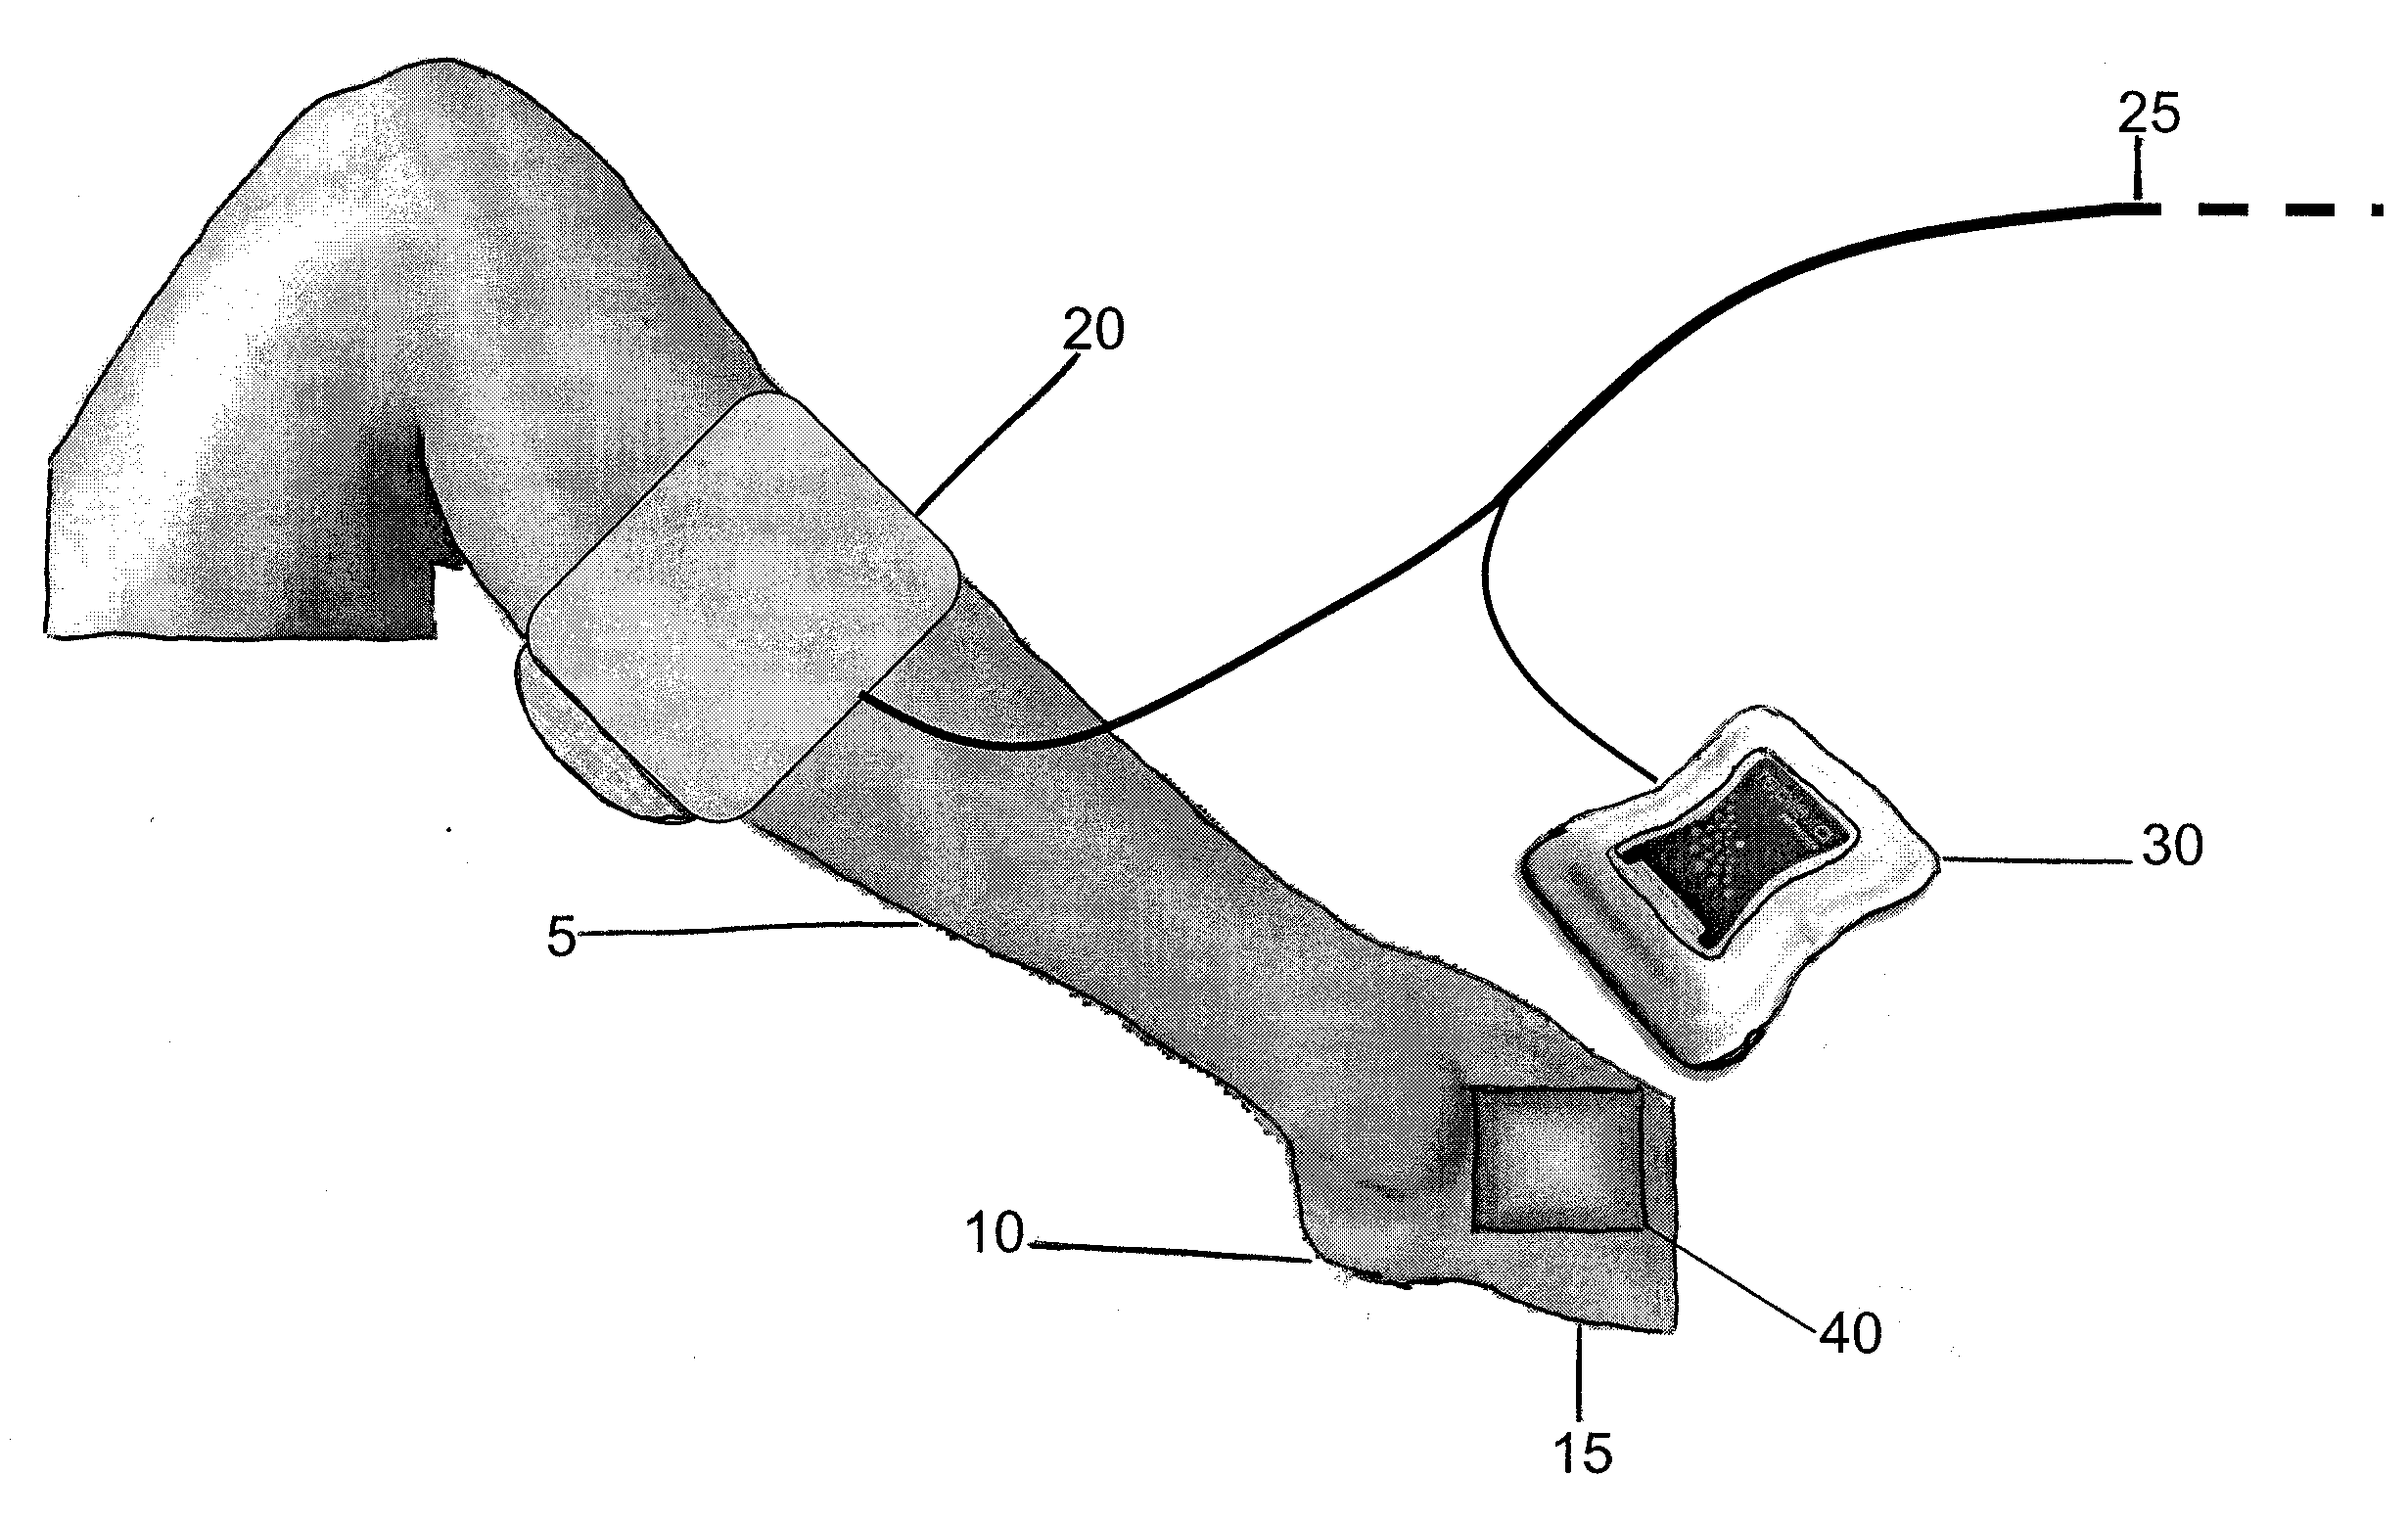 Method of treating a severe diabetic ulcer